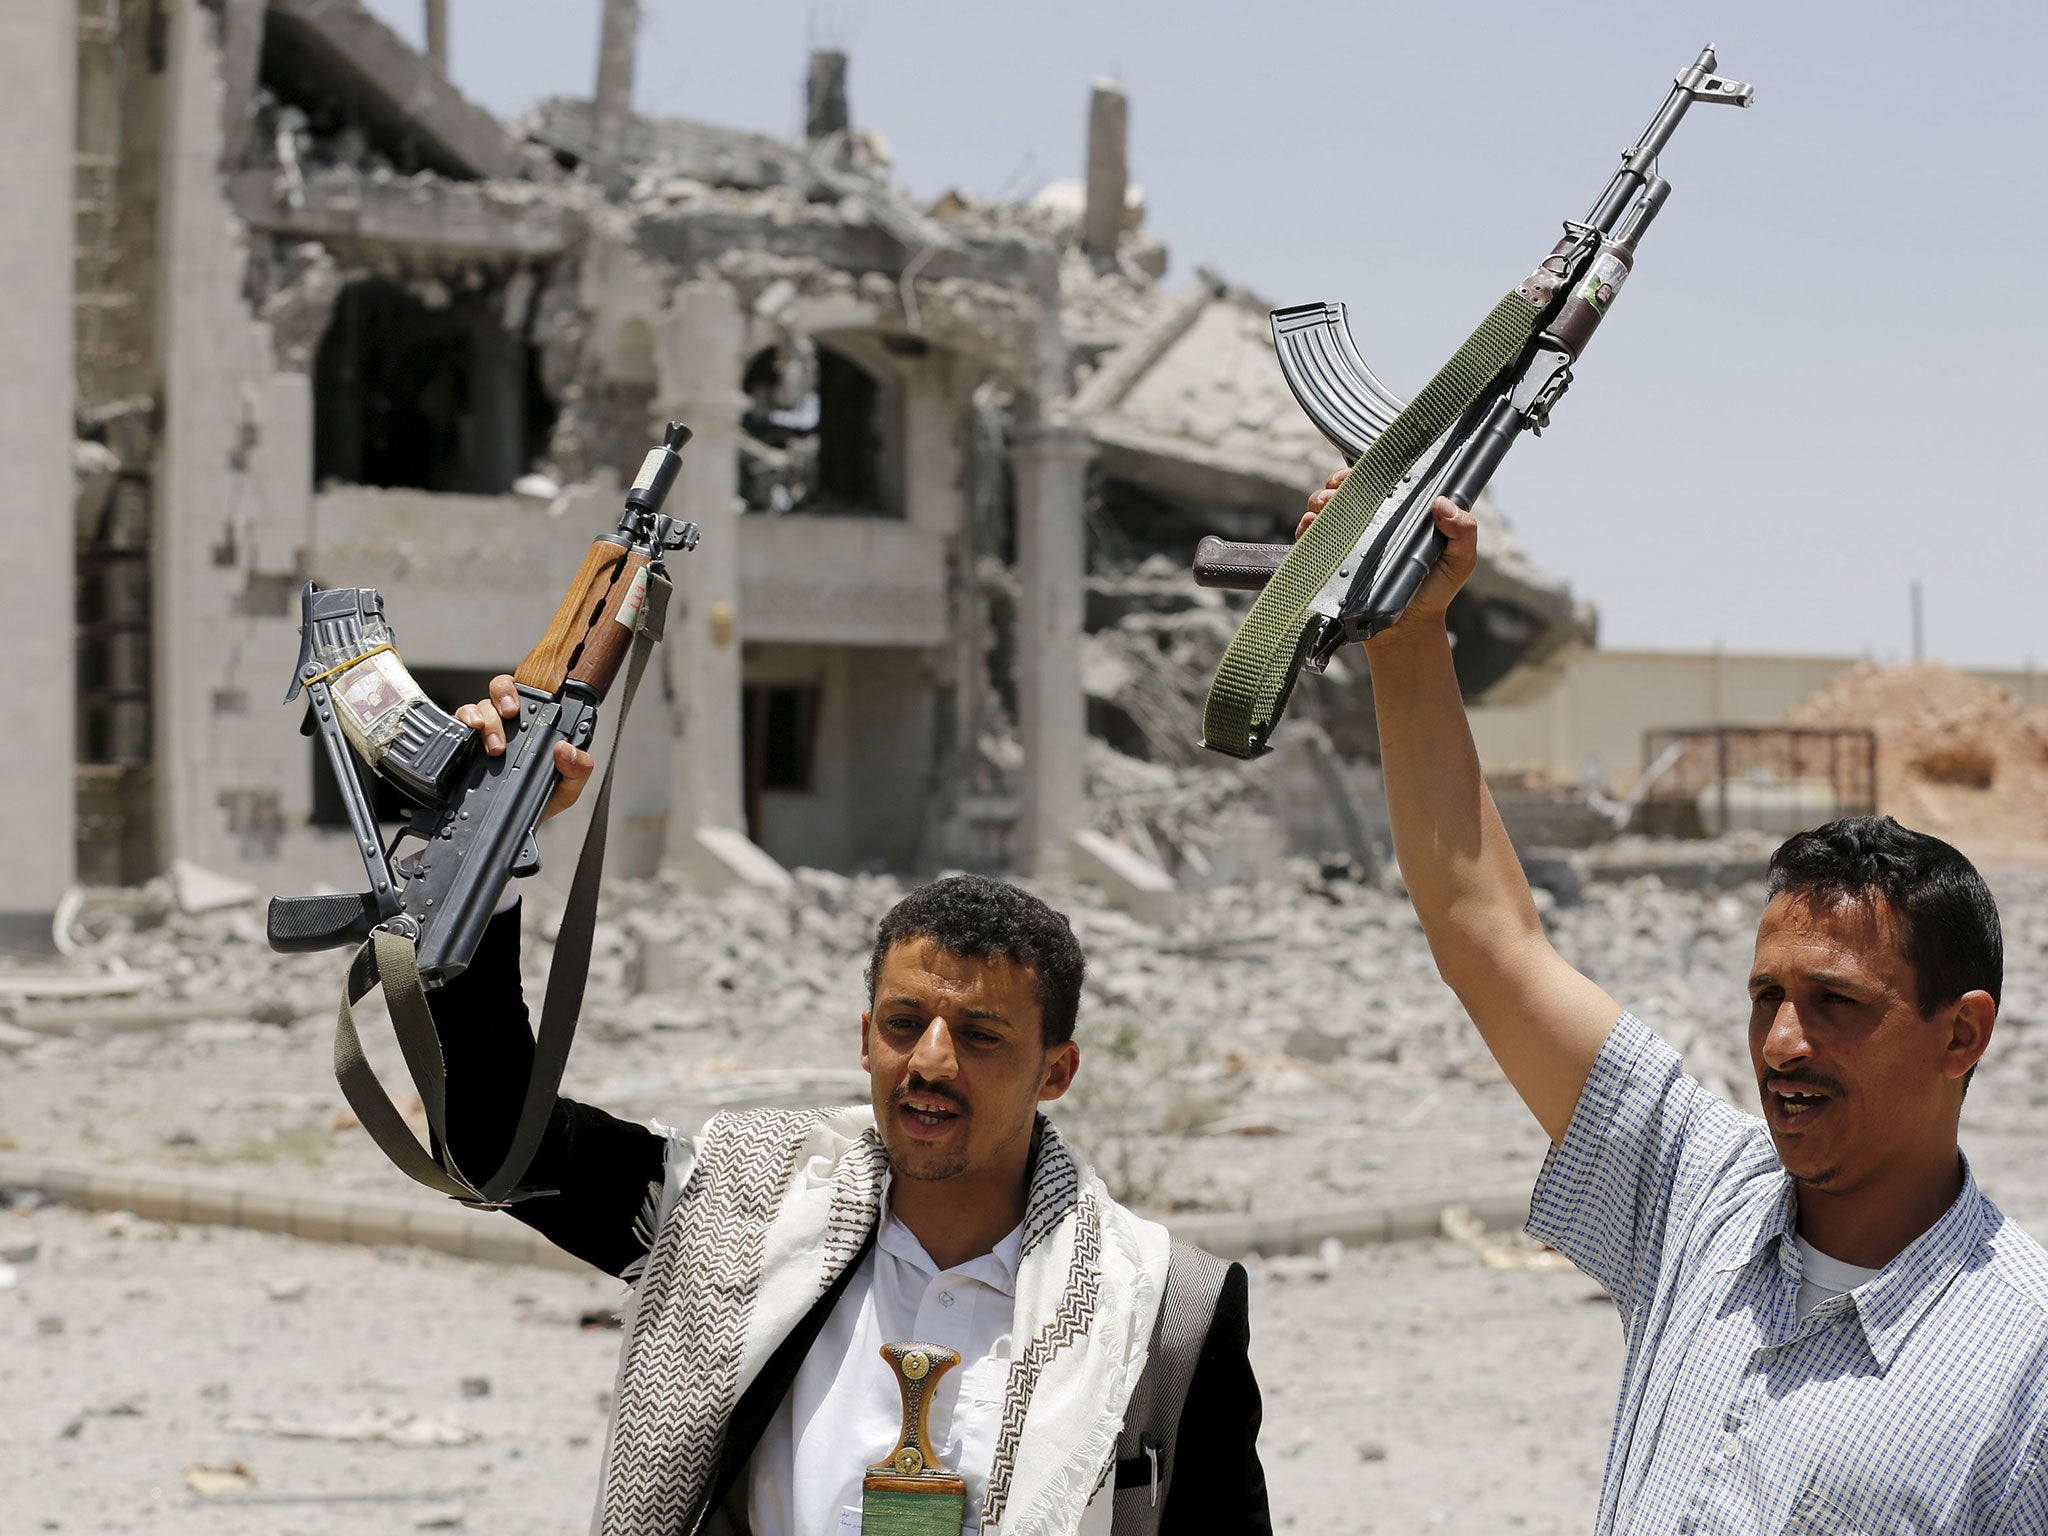 Houthi rebels have overrun the capital, Sanaa, and are advancing deep into southern Yemen